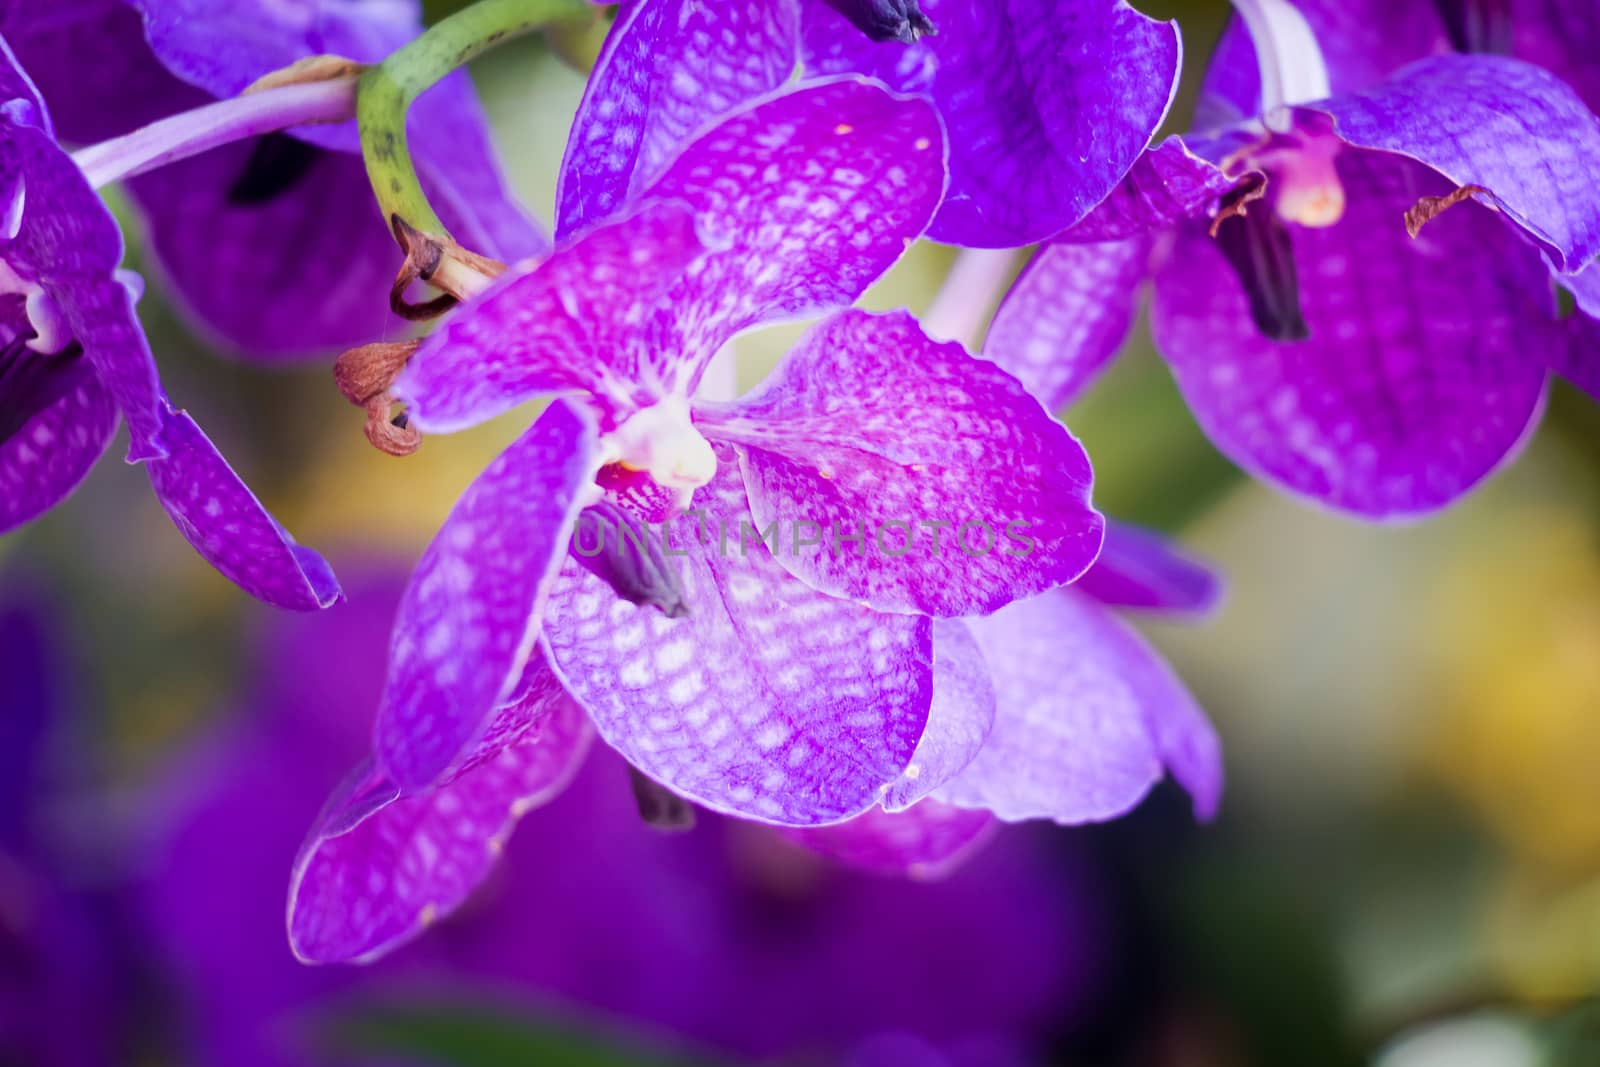 Vanda orchid by chingraph